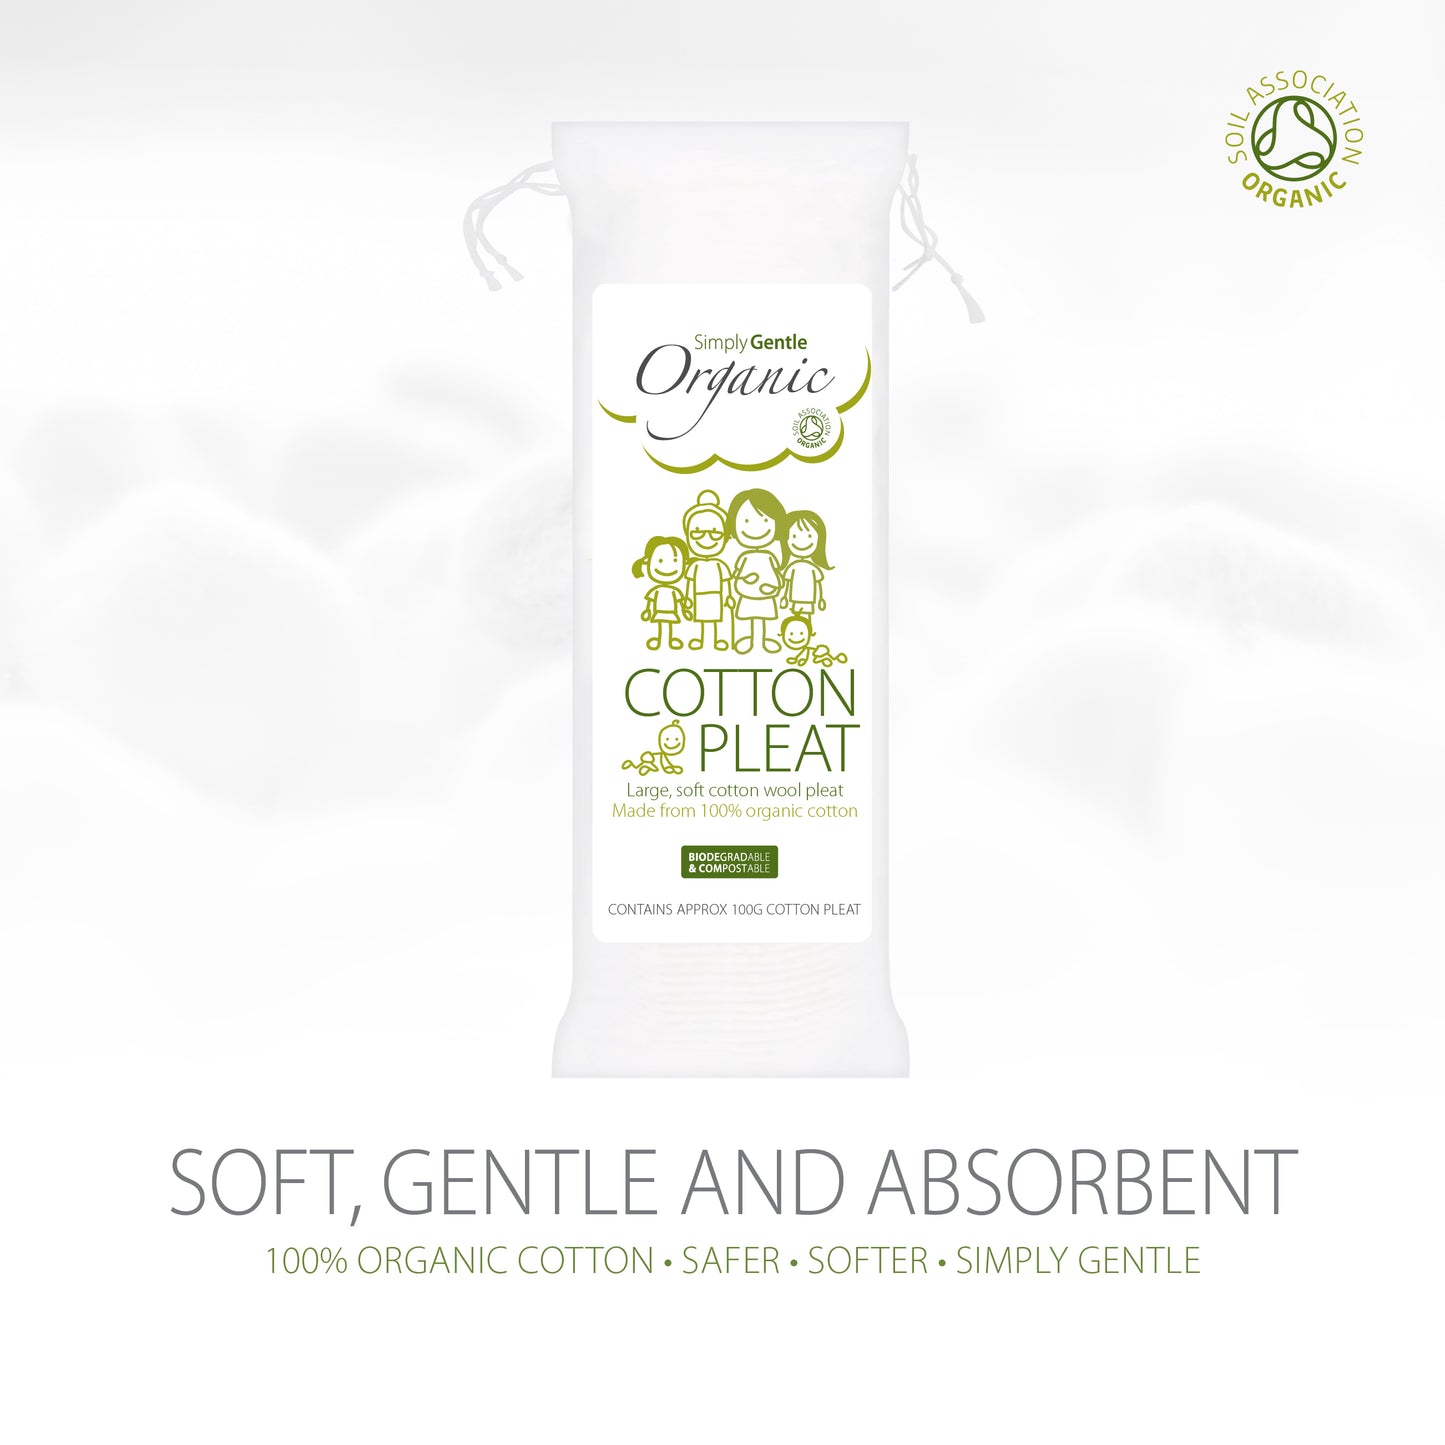 Simply Gentle Organic Cotton Pleats are soft, gentle and absorbent they will gently clean and dry between baby's fingers, toes, and around the eyes, nose or outer ear. They're especially ideal to use on delicate newborn skin. You can even use the our Organic Cotton Pleats as baby wipes in the first few months. 100% organic cotton wool. Soil Association approved.